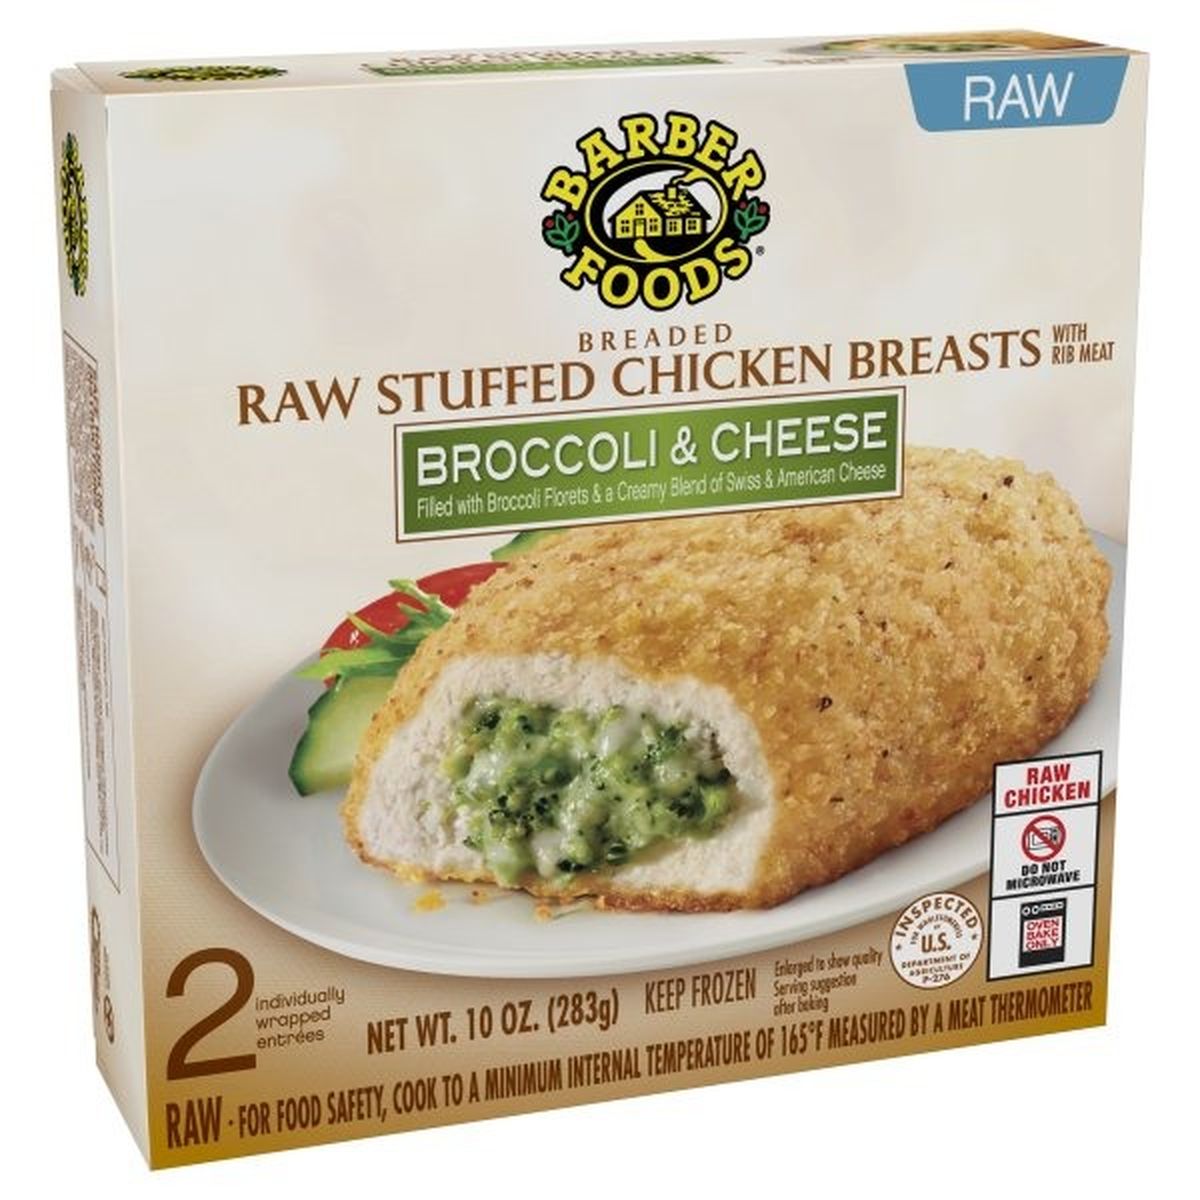 Calories in Barber Foods Stuffed Chicken Breasts Broccoli Cheese, 2 Count